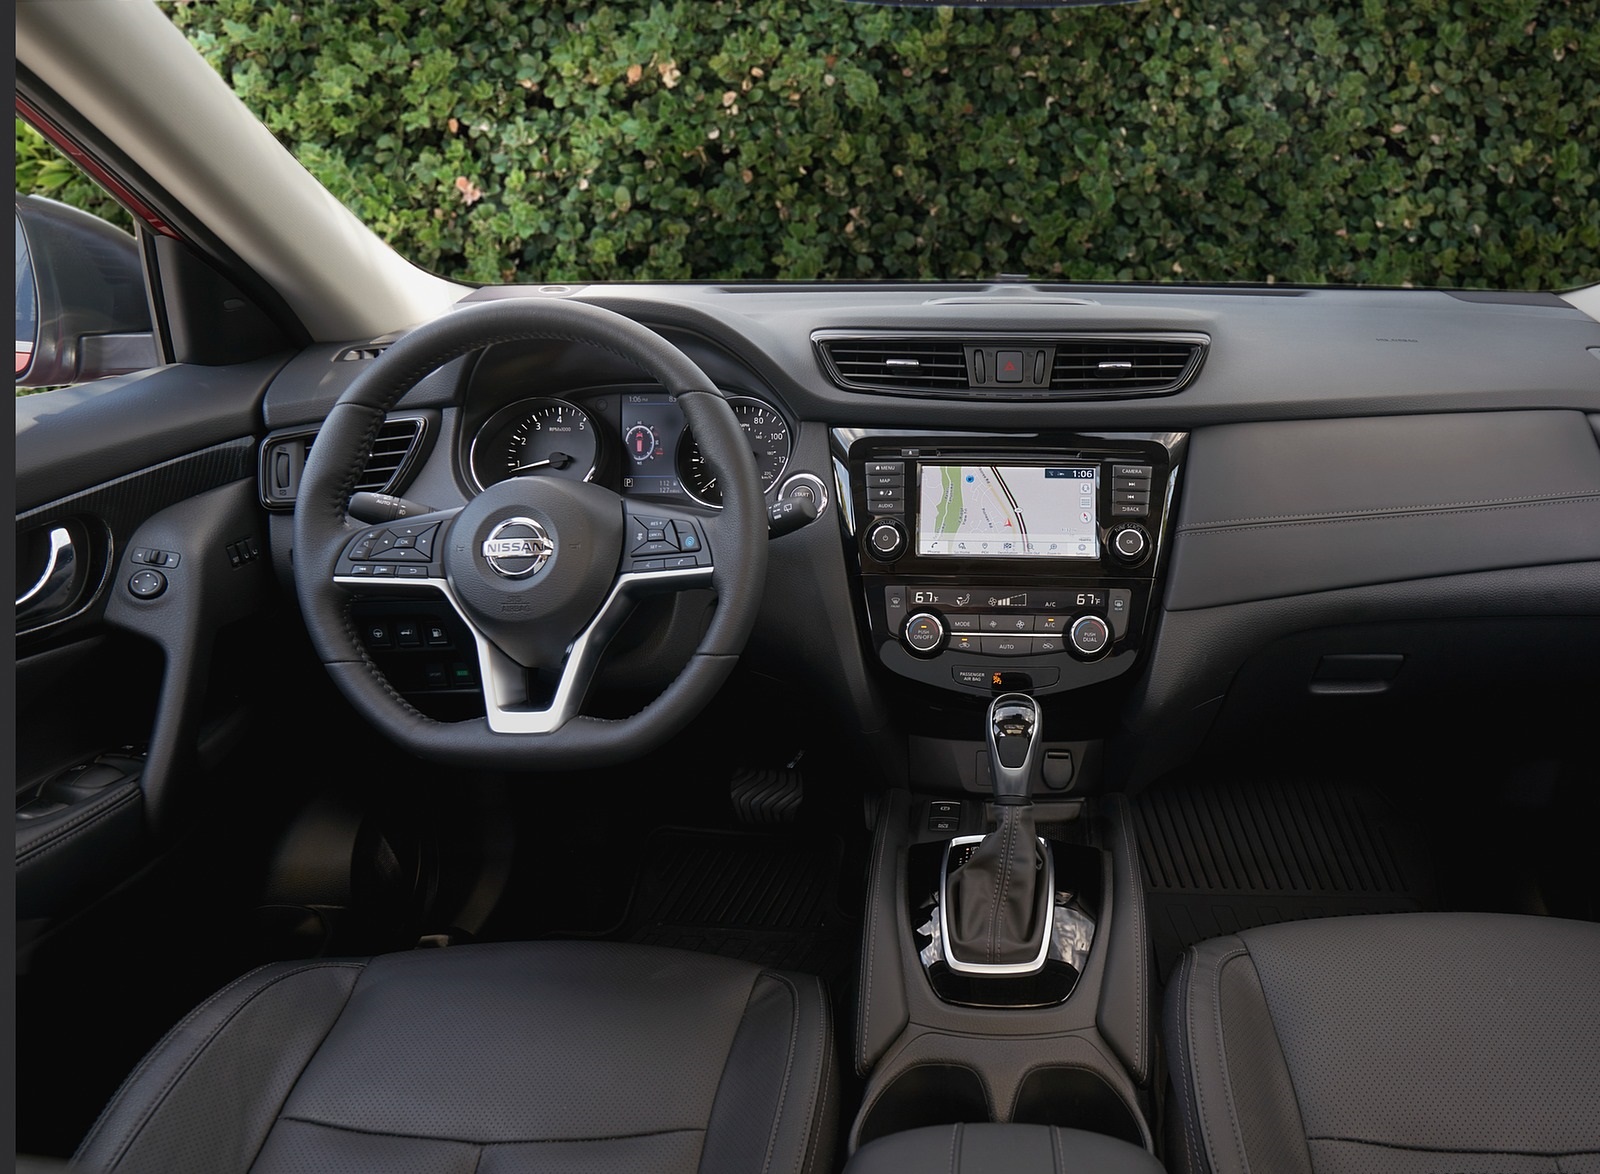 2020 Nissan Rogue Interior Cockpit Wallpapers #18 of 26